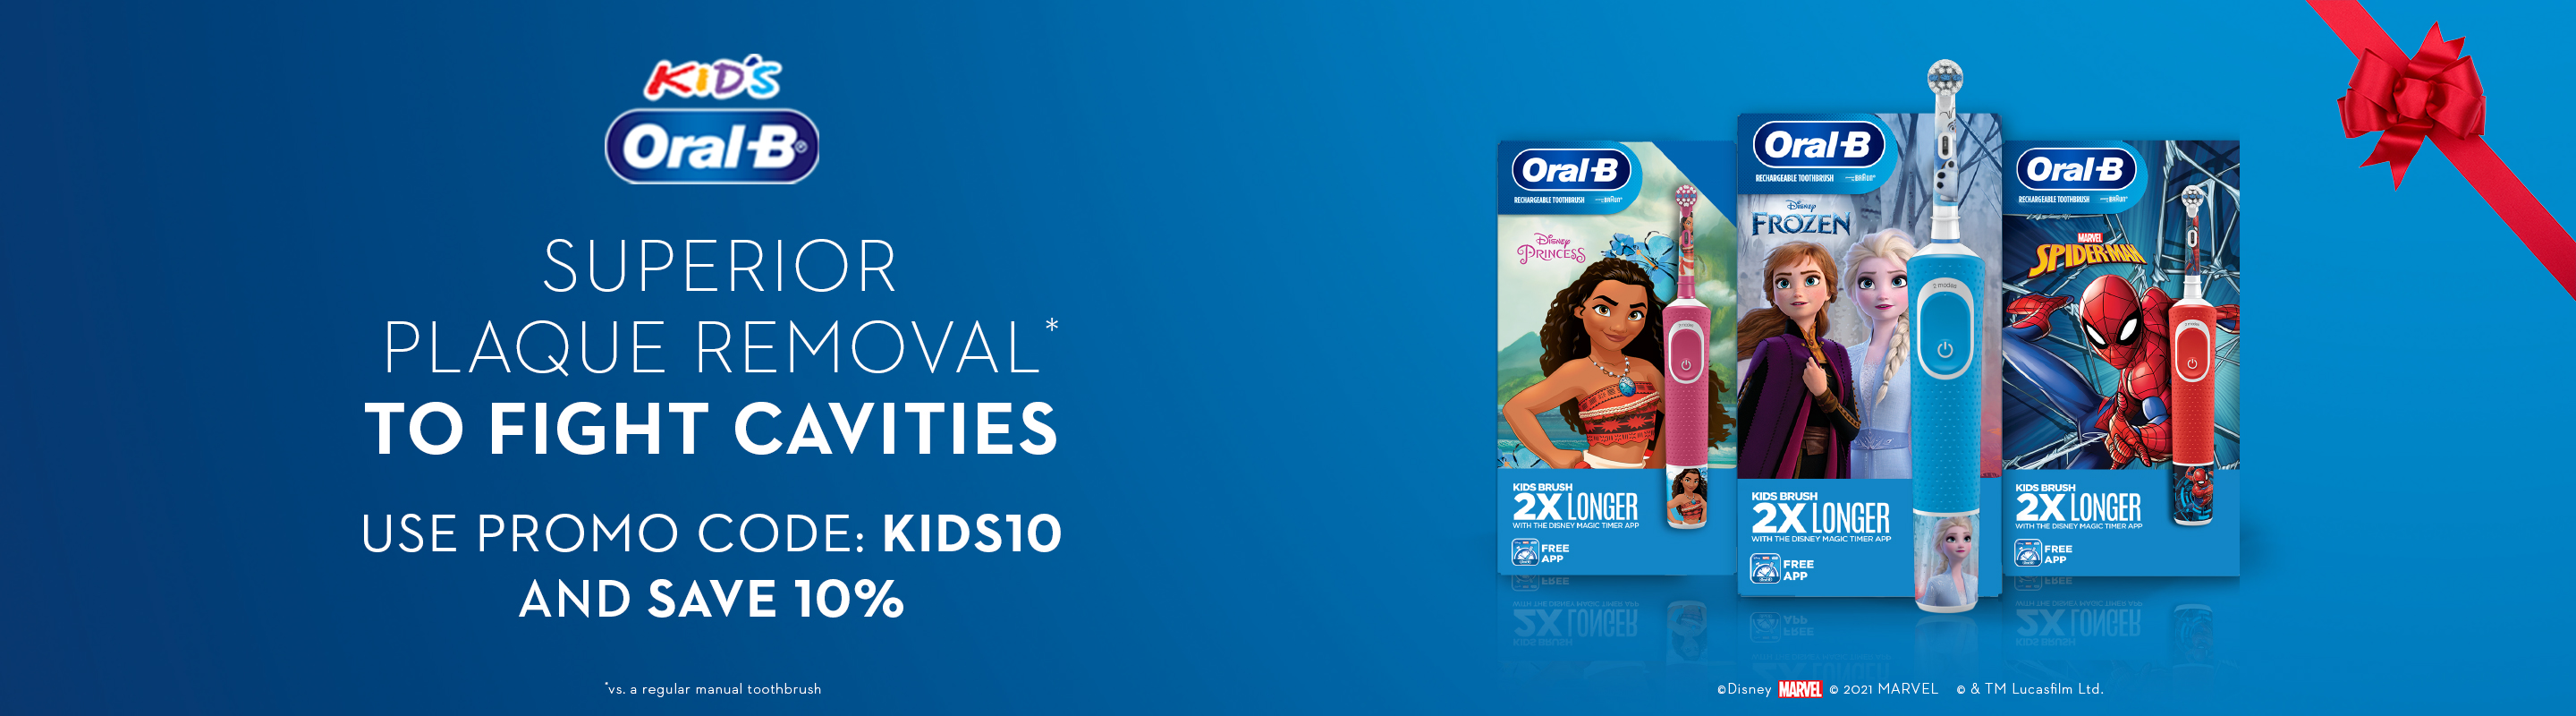 homepage banner OralB io : professional clean feel everyday